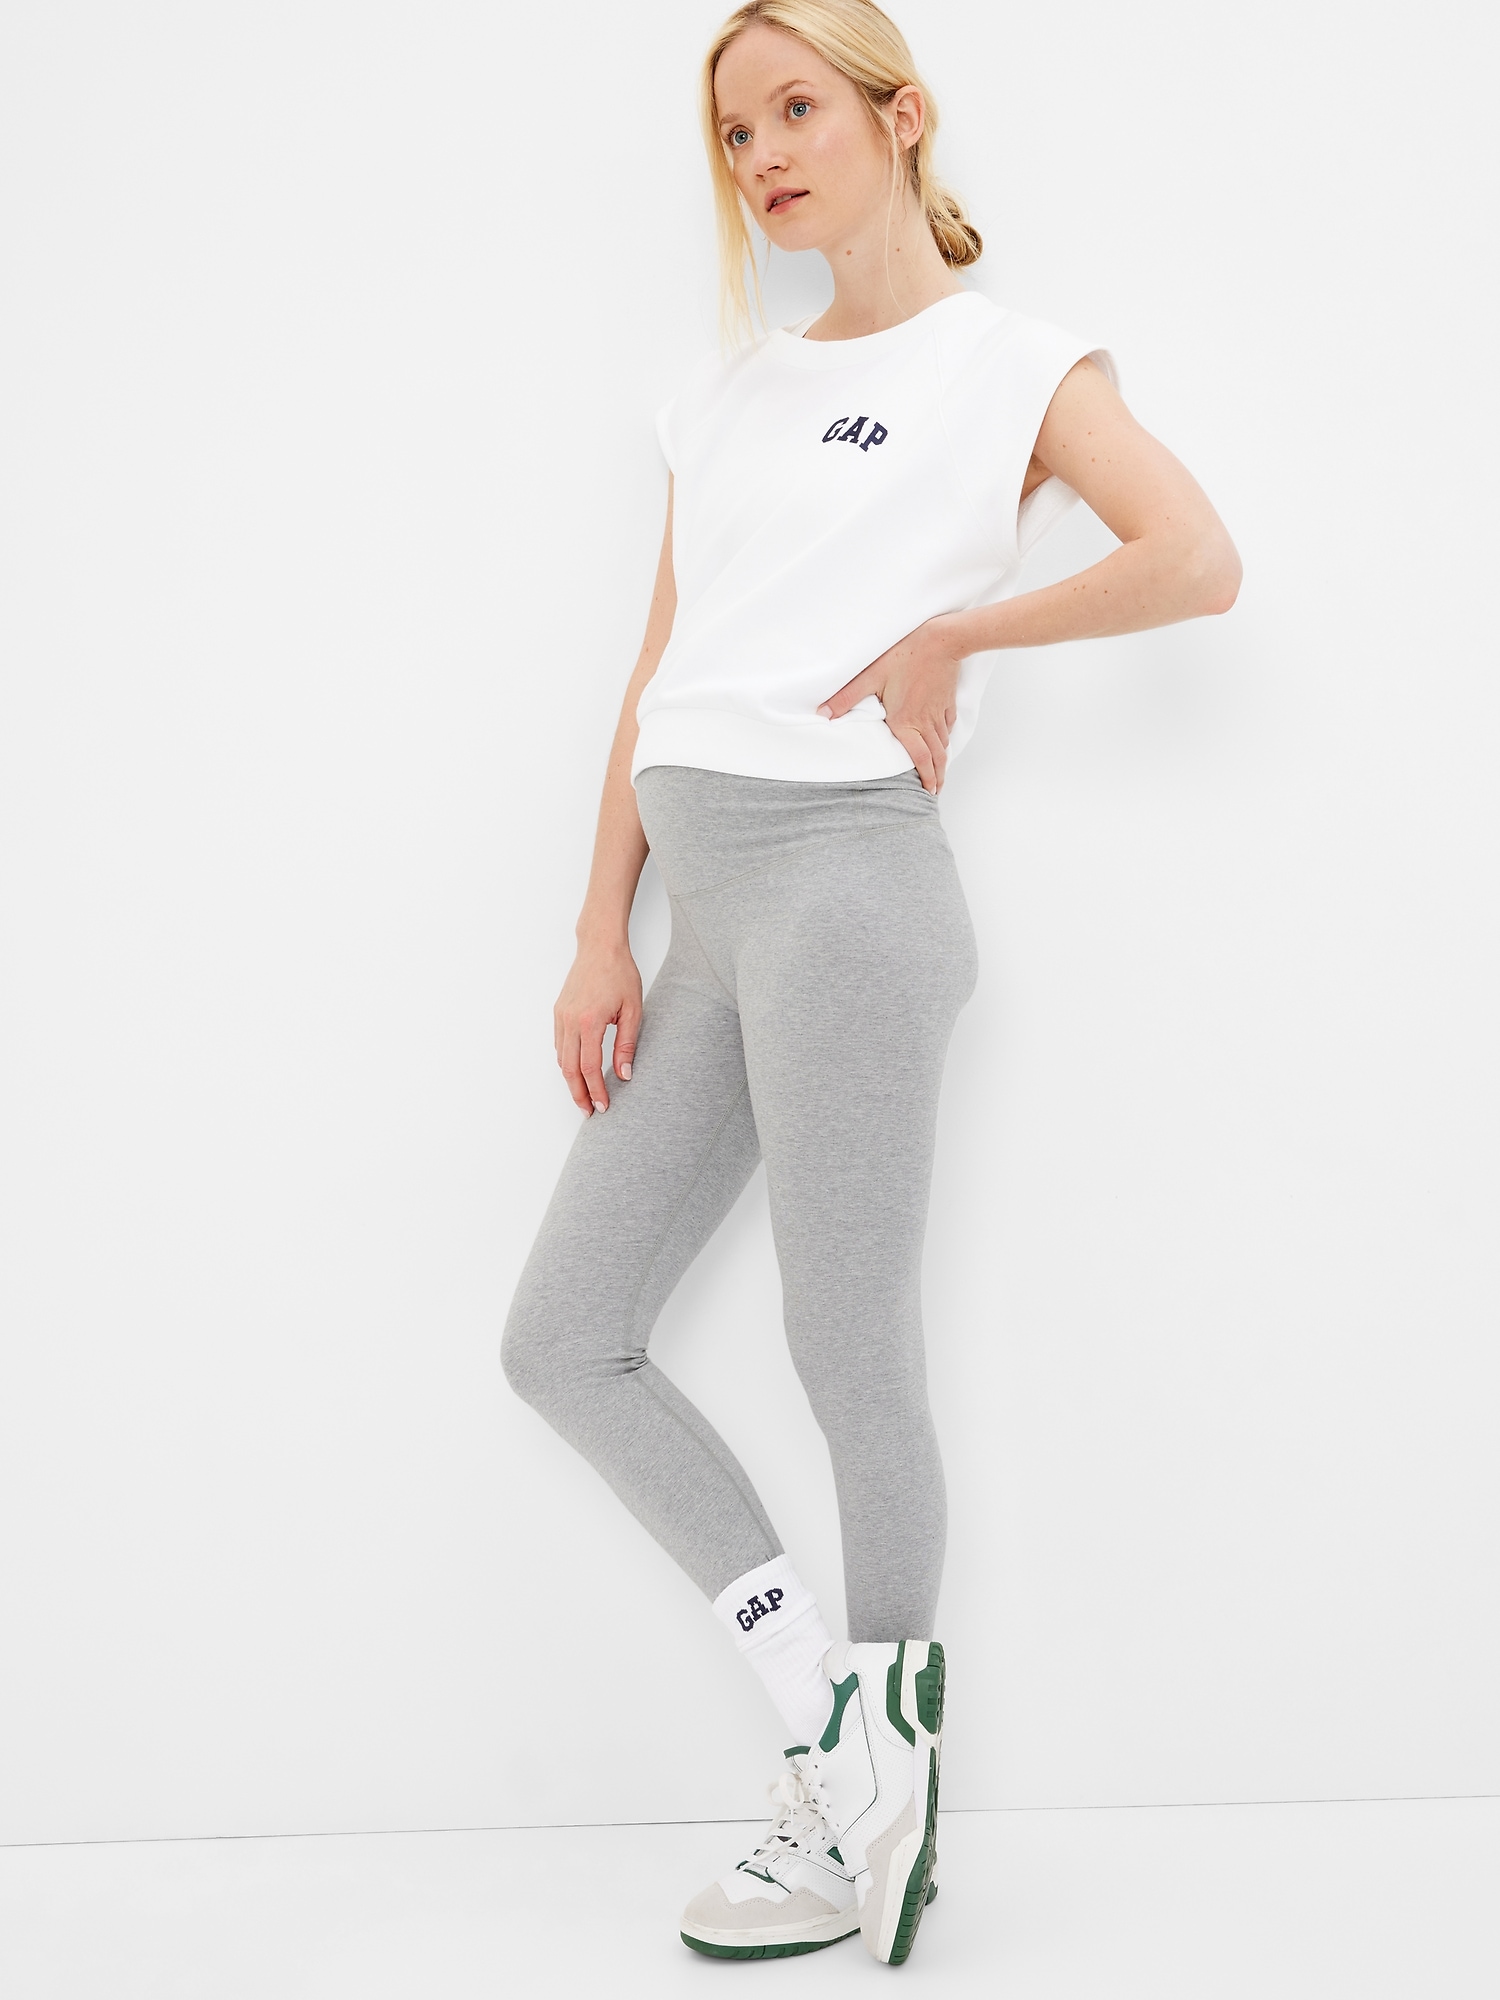 Cotton On Maternity activewear leggings in black